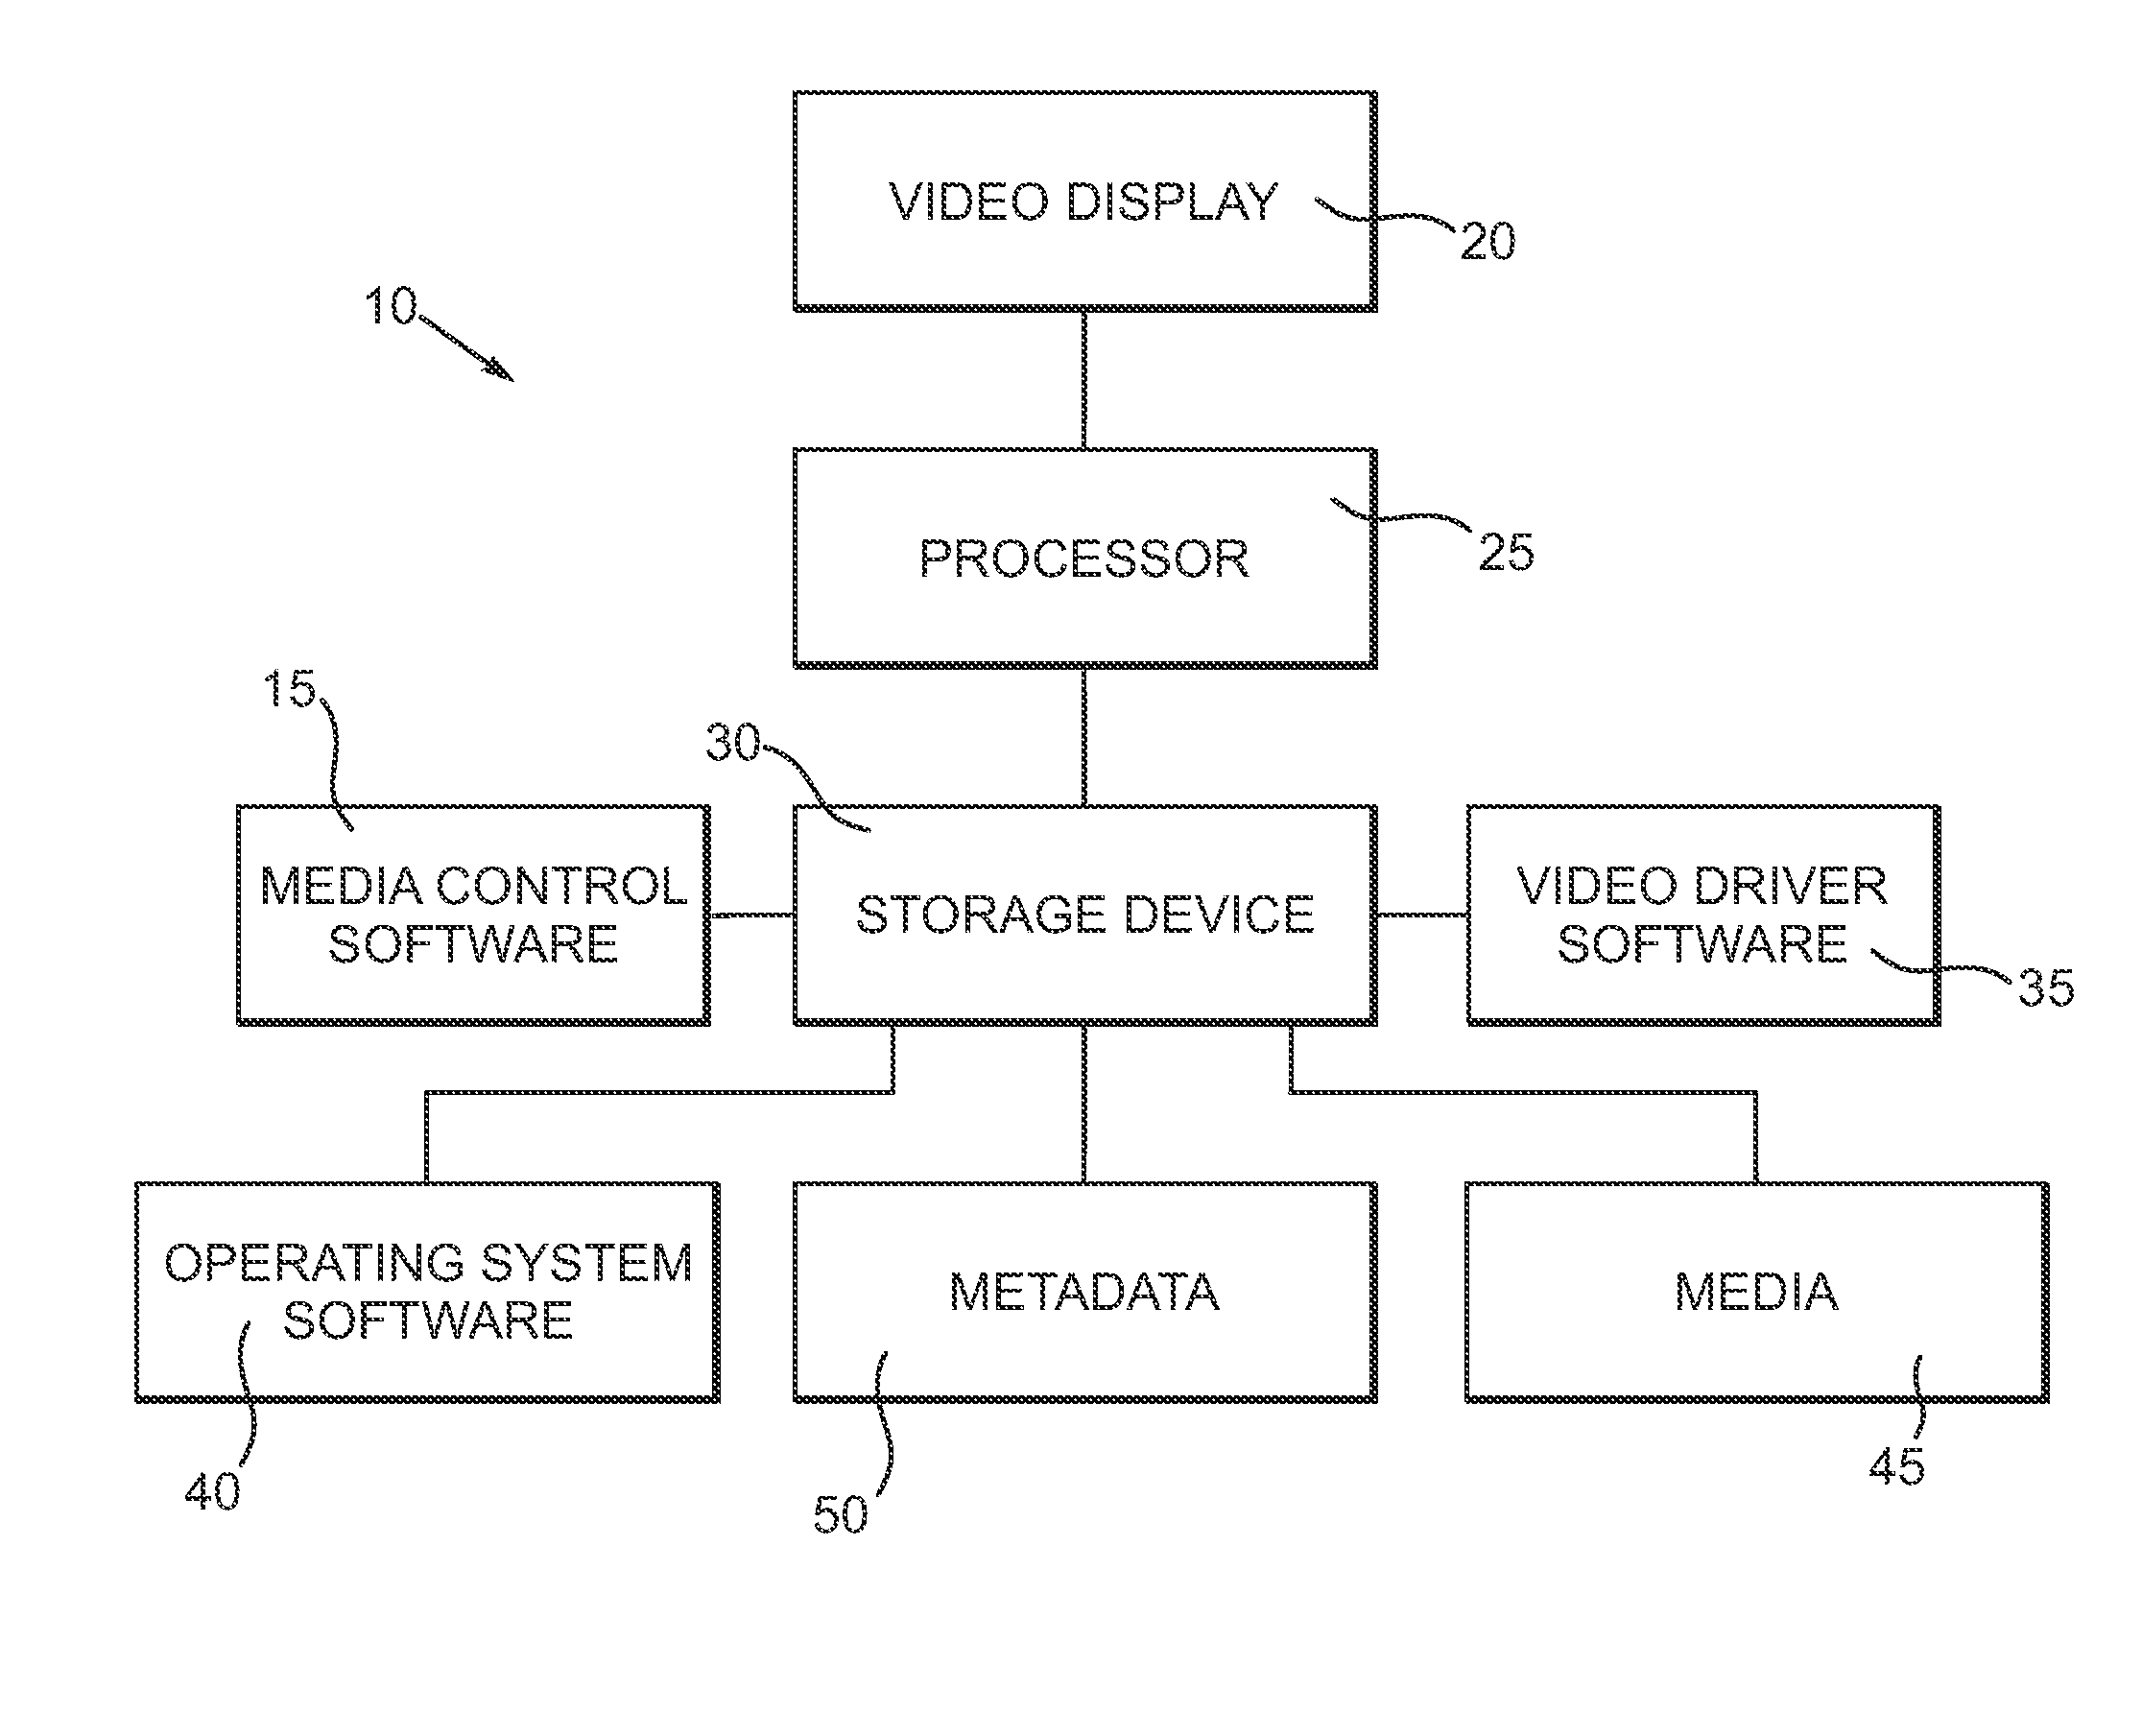 Media file system with associated metadata